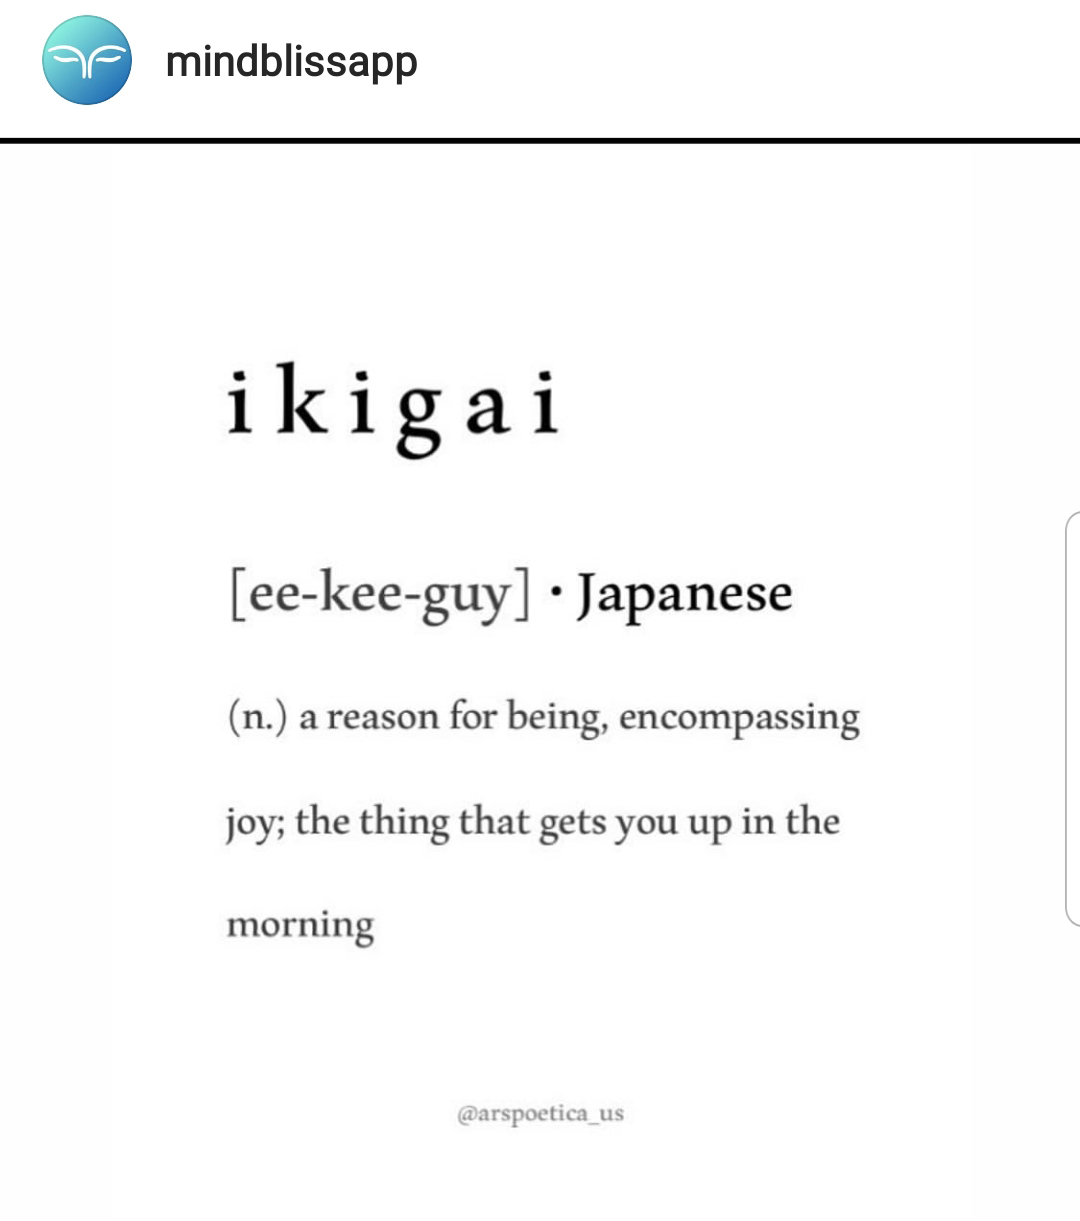 ikigai - Japanese for a reason for being, encompassing joy, the thing that gets you up in the morning